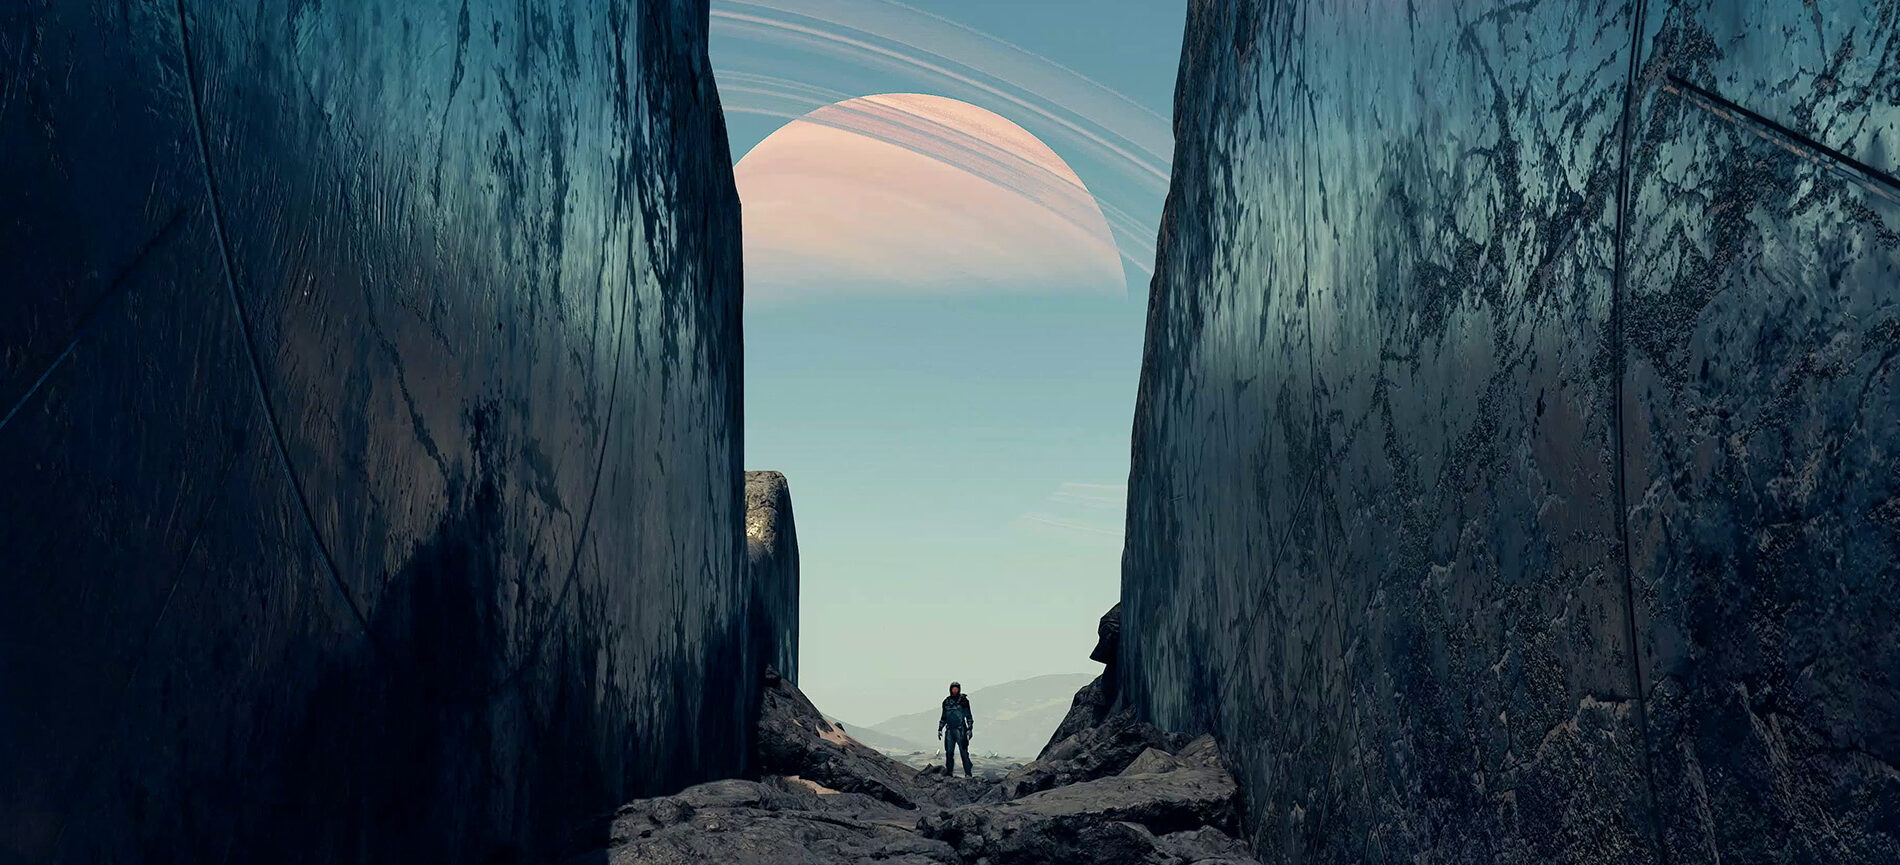 Person in a spacesuit stands on a planet